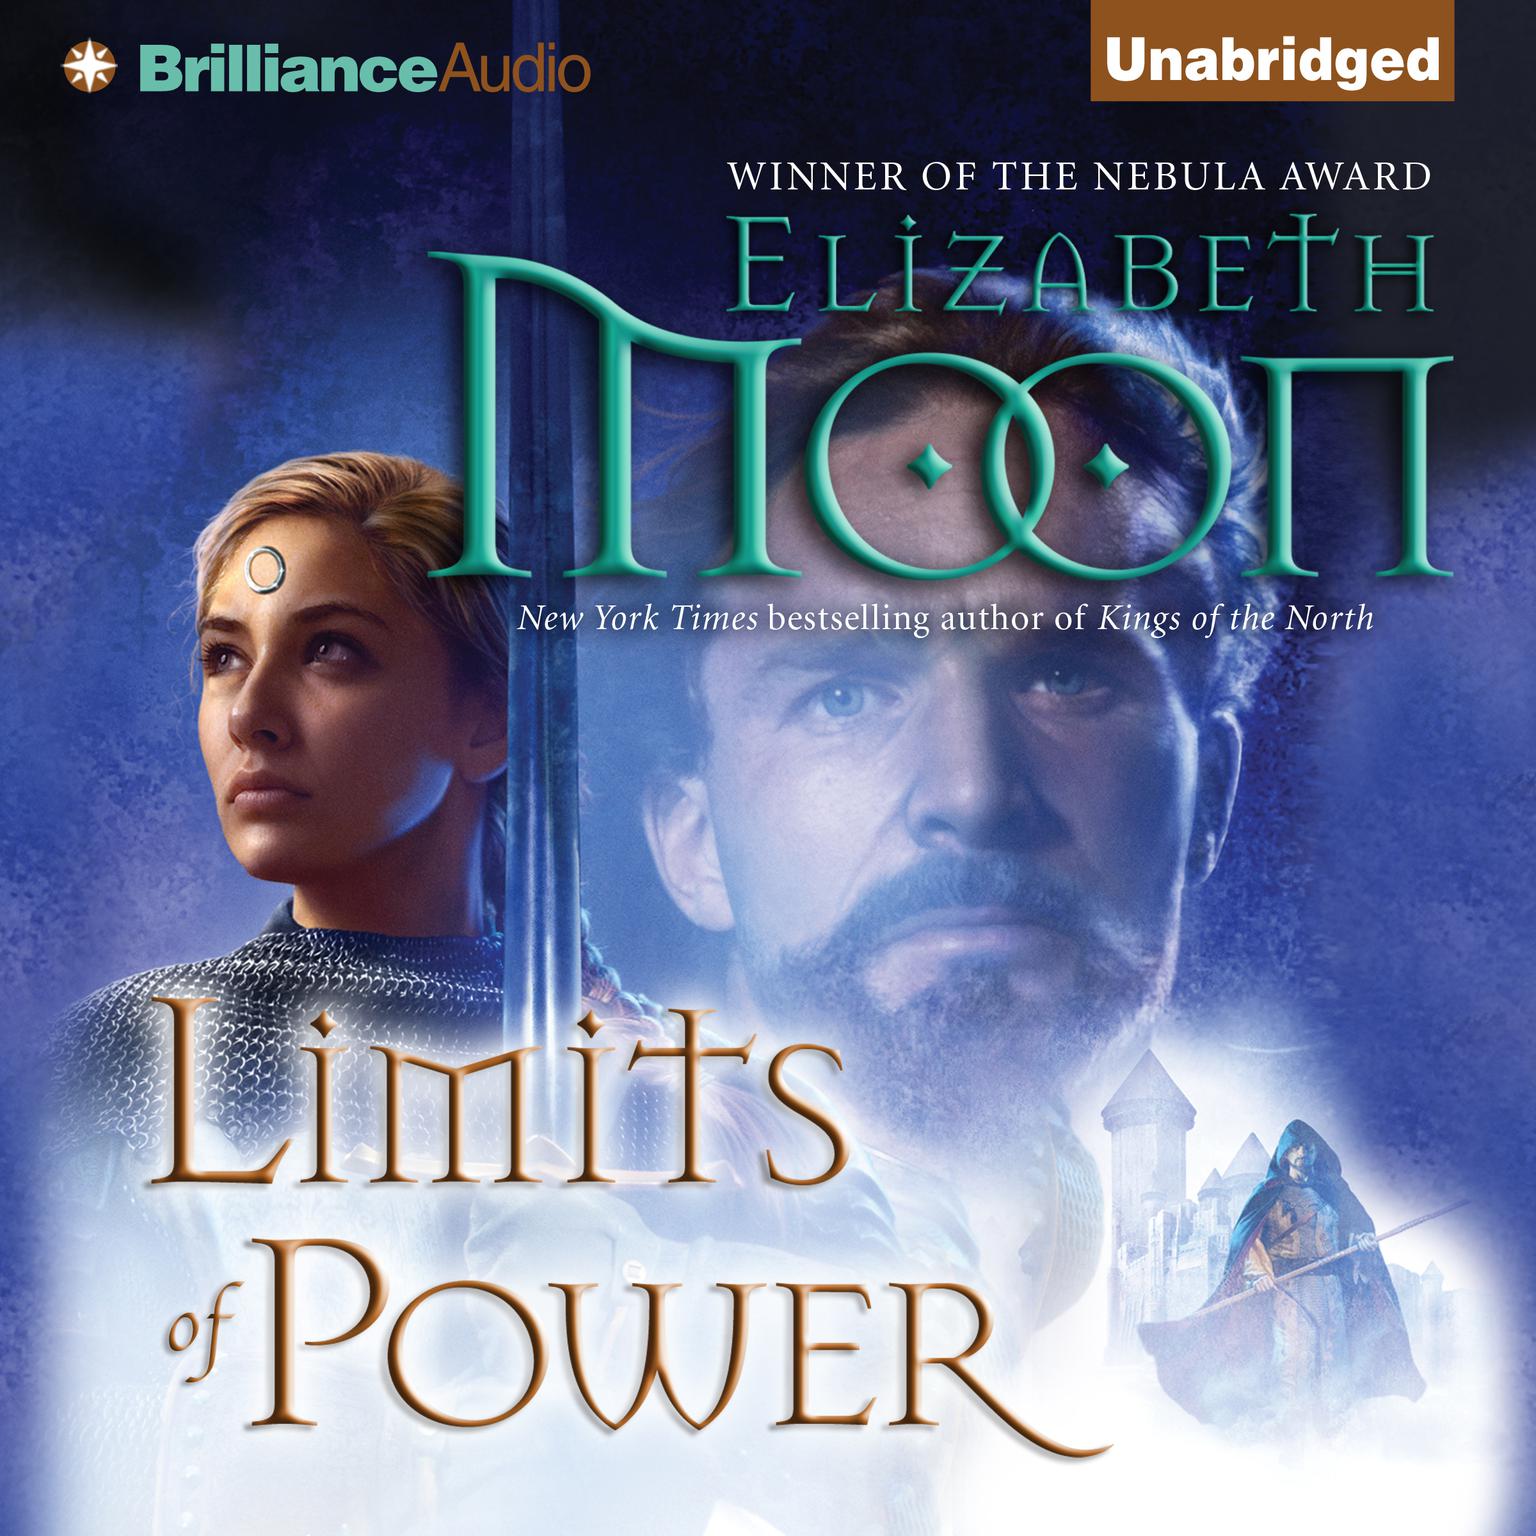 Limits of Power Audiobook, by Elizabeth Moon